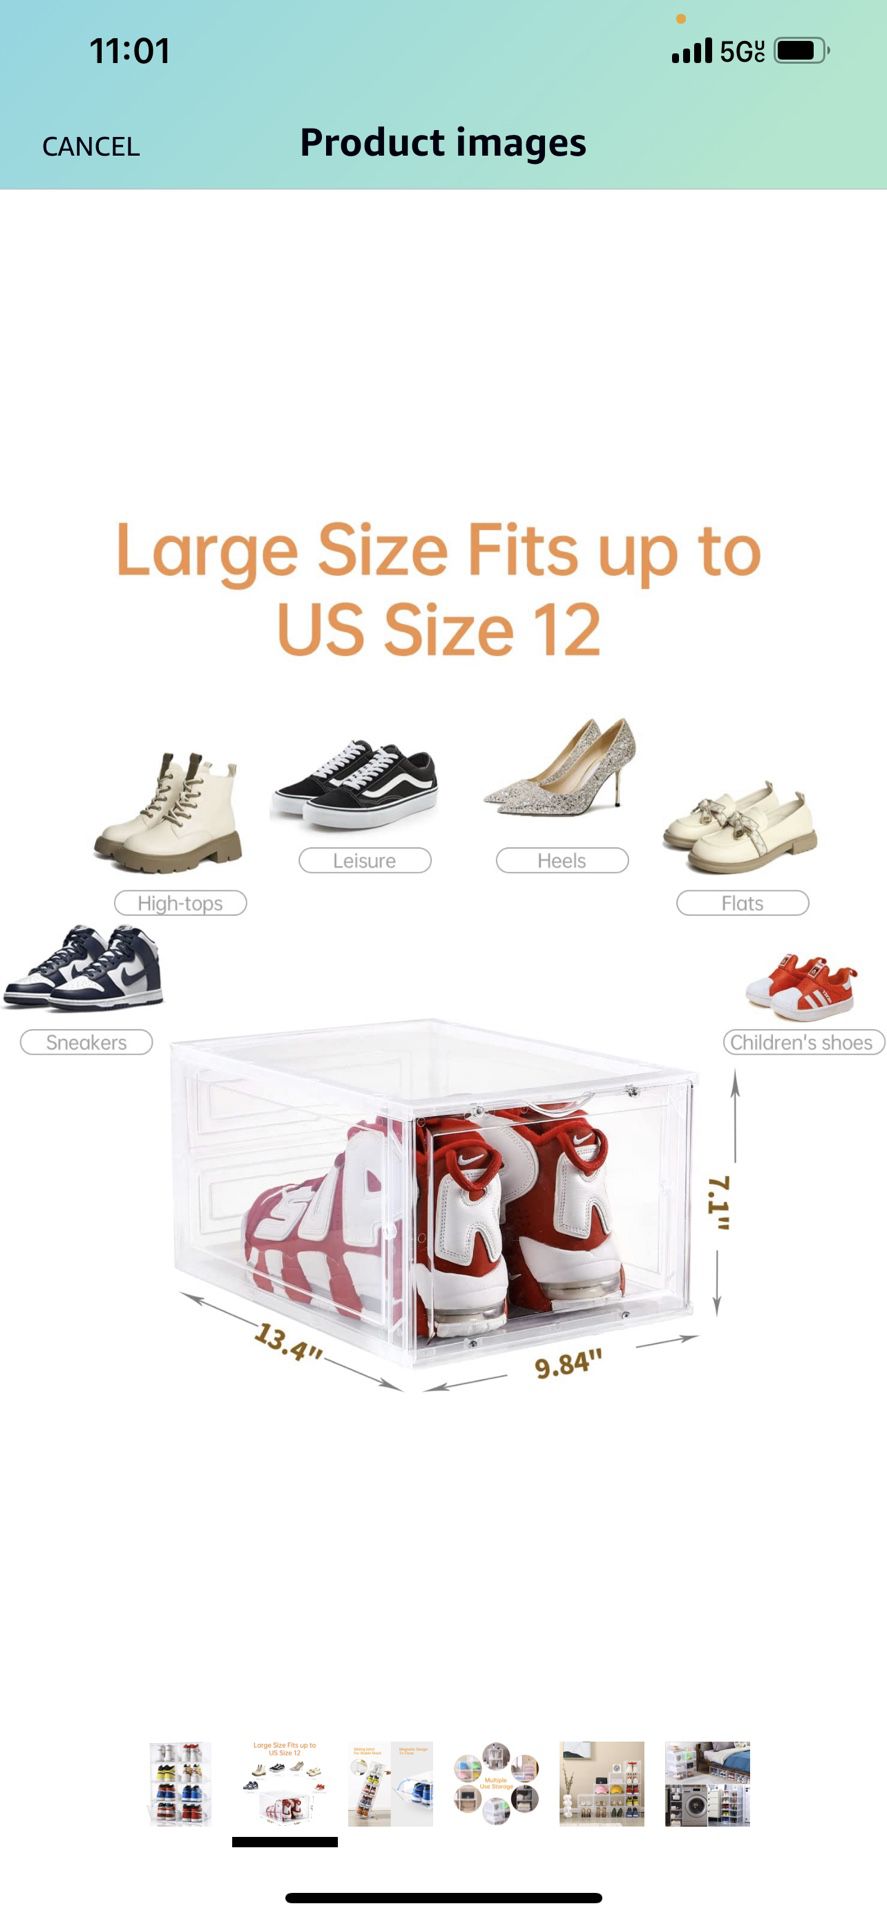 Shoe Storage Box,Set of 8,Shoe Box Clear Plastic Stackable,Drop Front Shoe Box with Clear Door,Shoe Organizer and Shoe Containers For Sneaker Display,